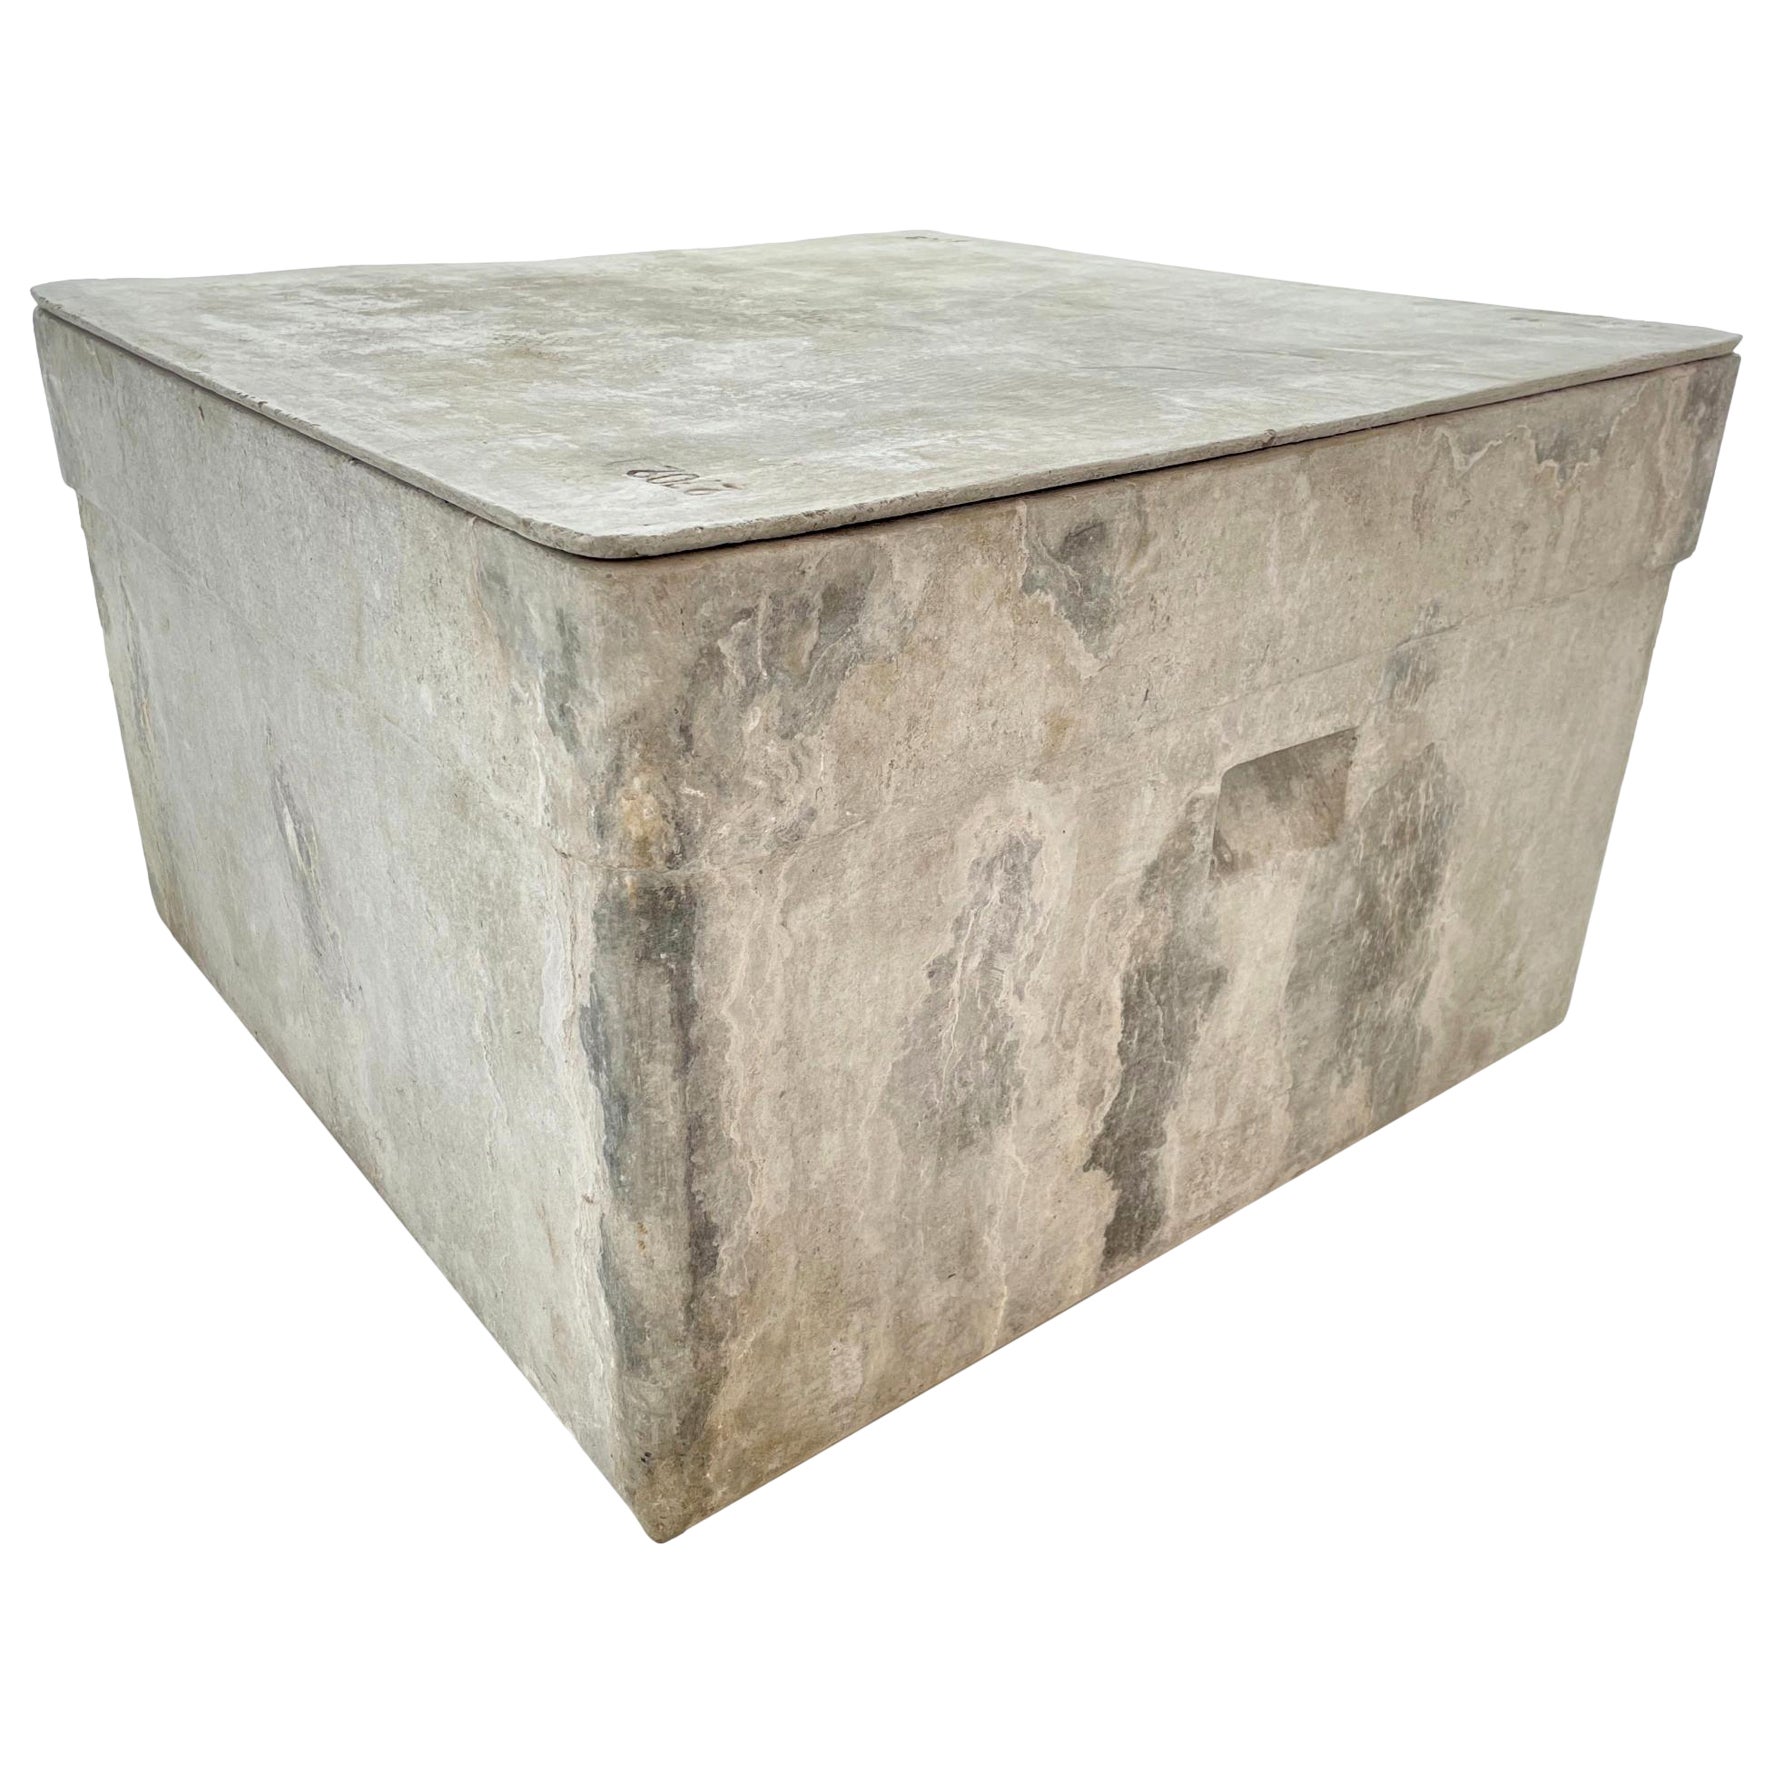 Sculptural concrete box by Willy Guhl. Handmade in Switzerland, in the 1960s. Rounded rectangular frame with indented handles. Unusual object perfect for storage or as a tree planter. Very good condition. Great patina. Removable concrete lid.